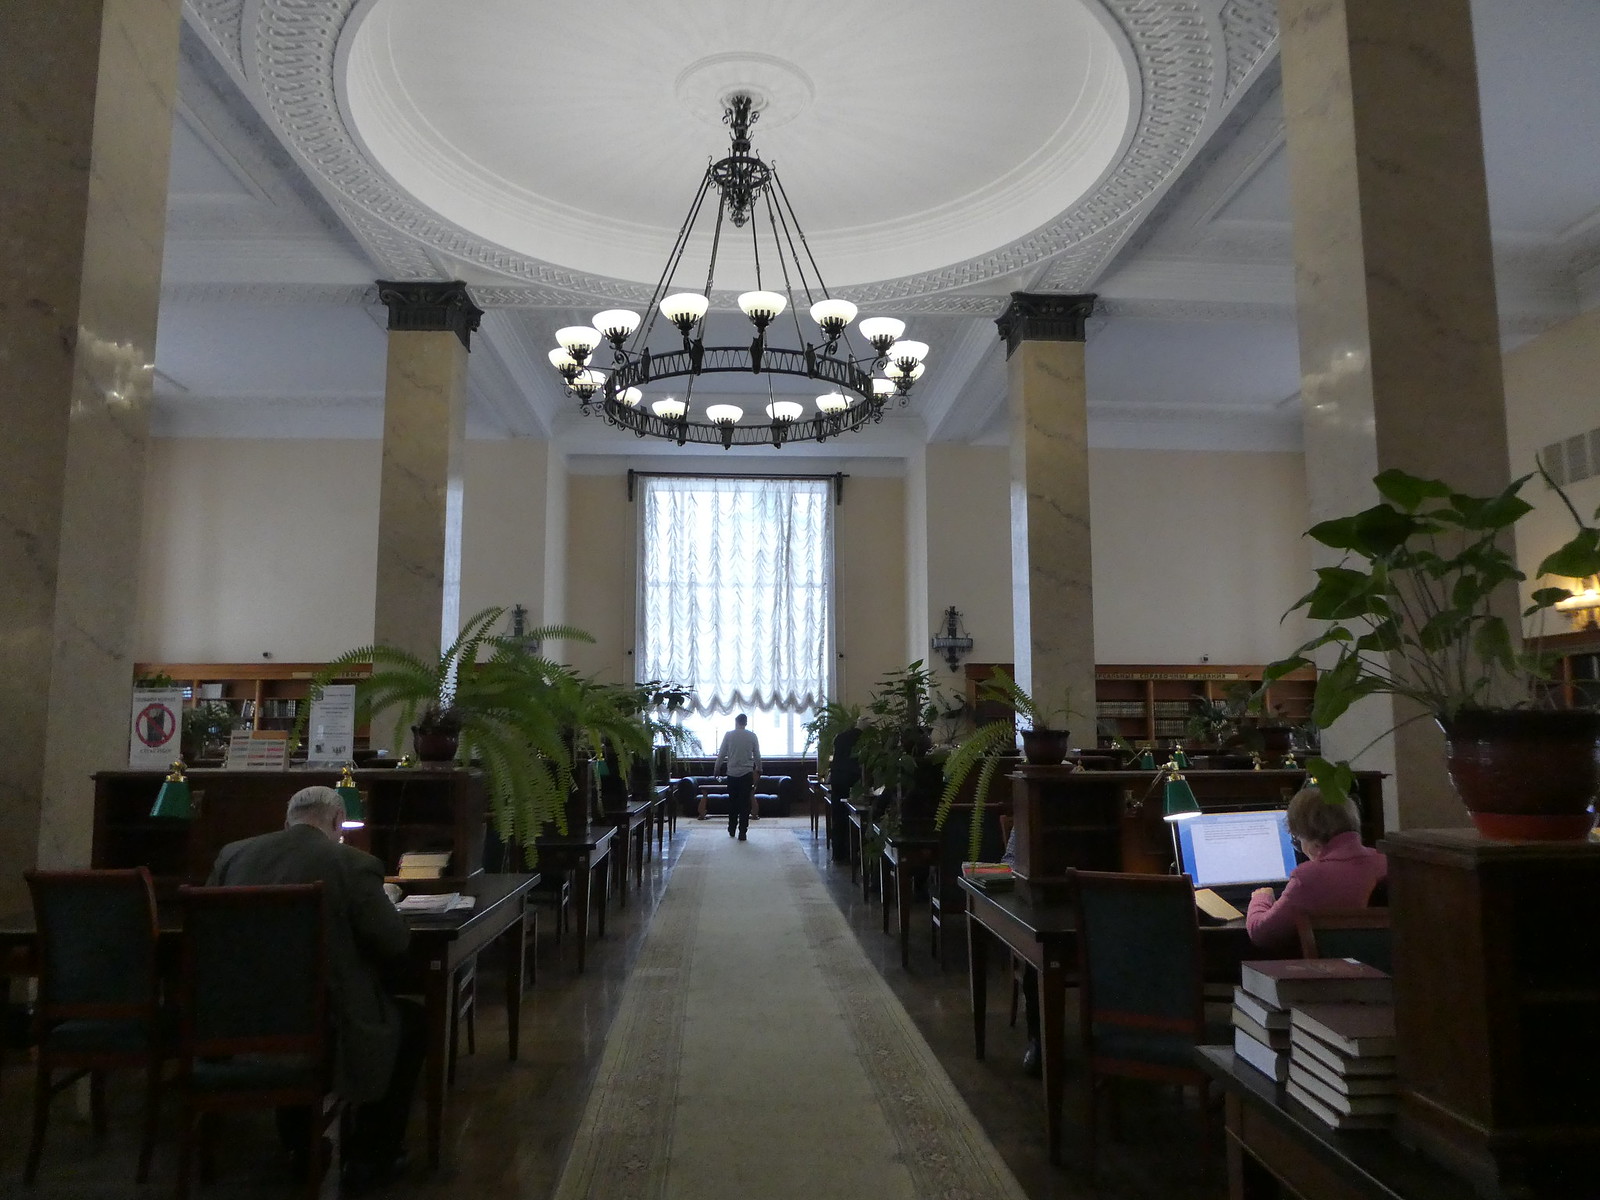 Russian State Library, Moscow